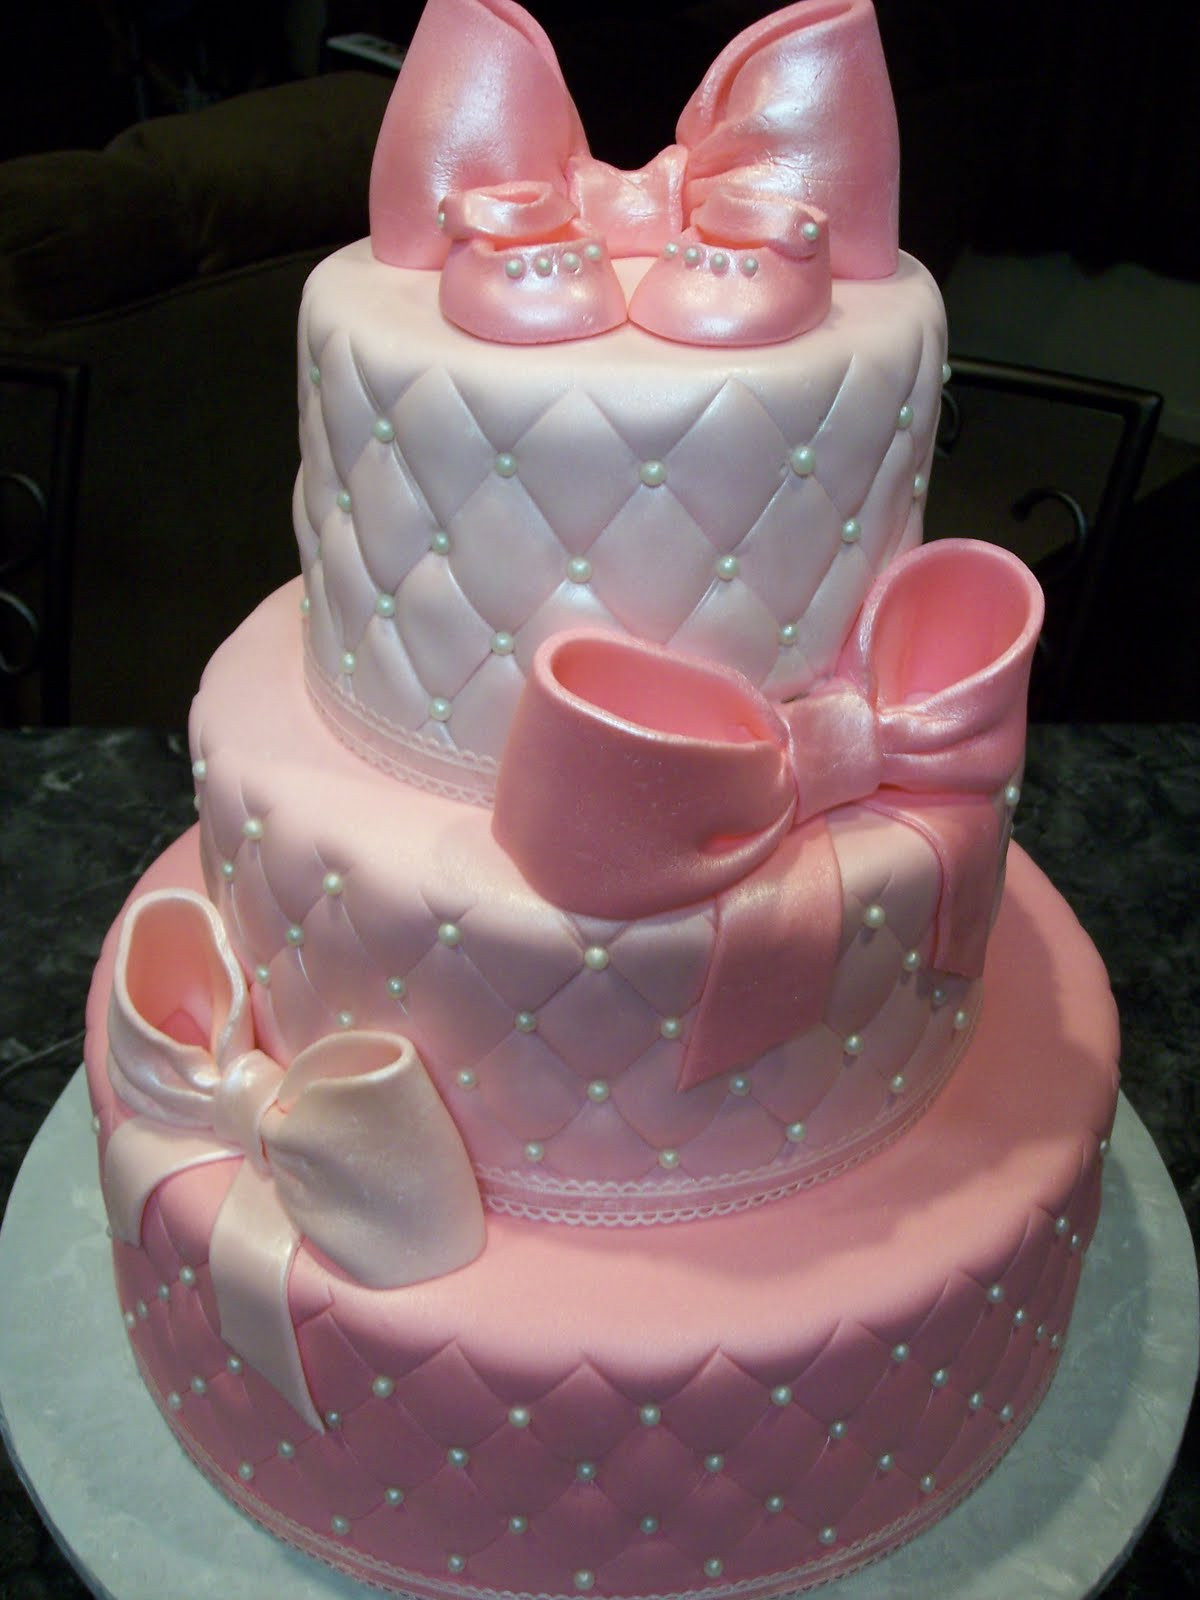 Baby Shower Cake Decoration Ideas
 70 Baby Shower Cakes and Cupcakes Ideas